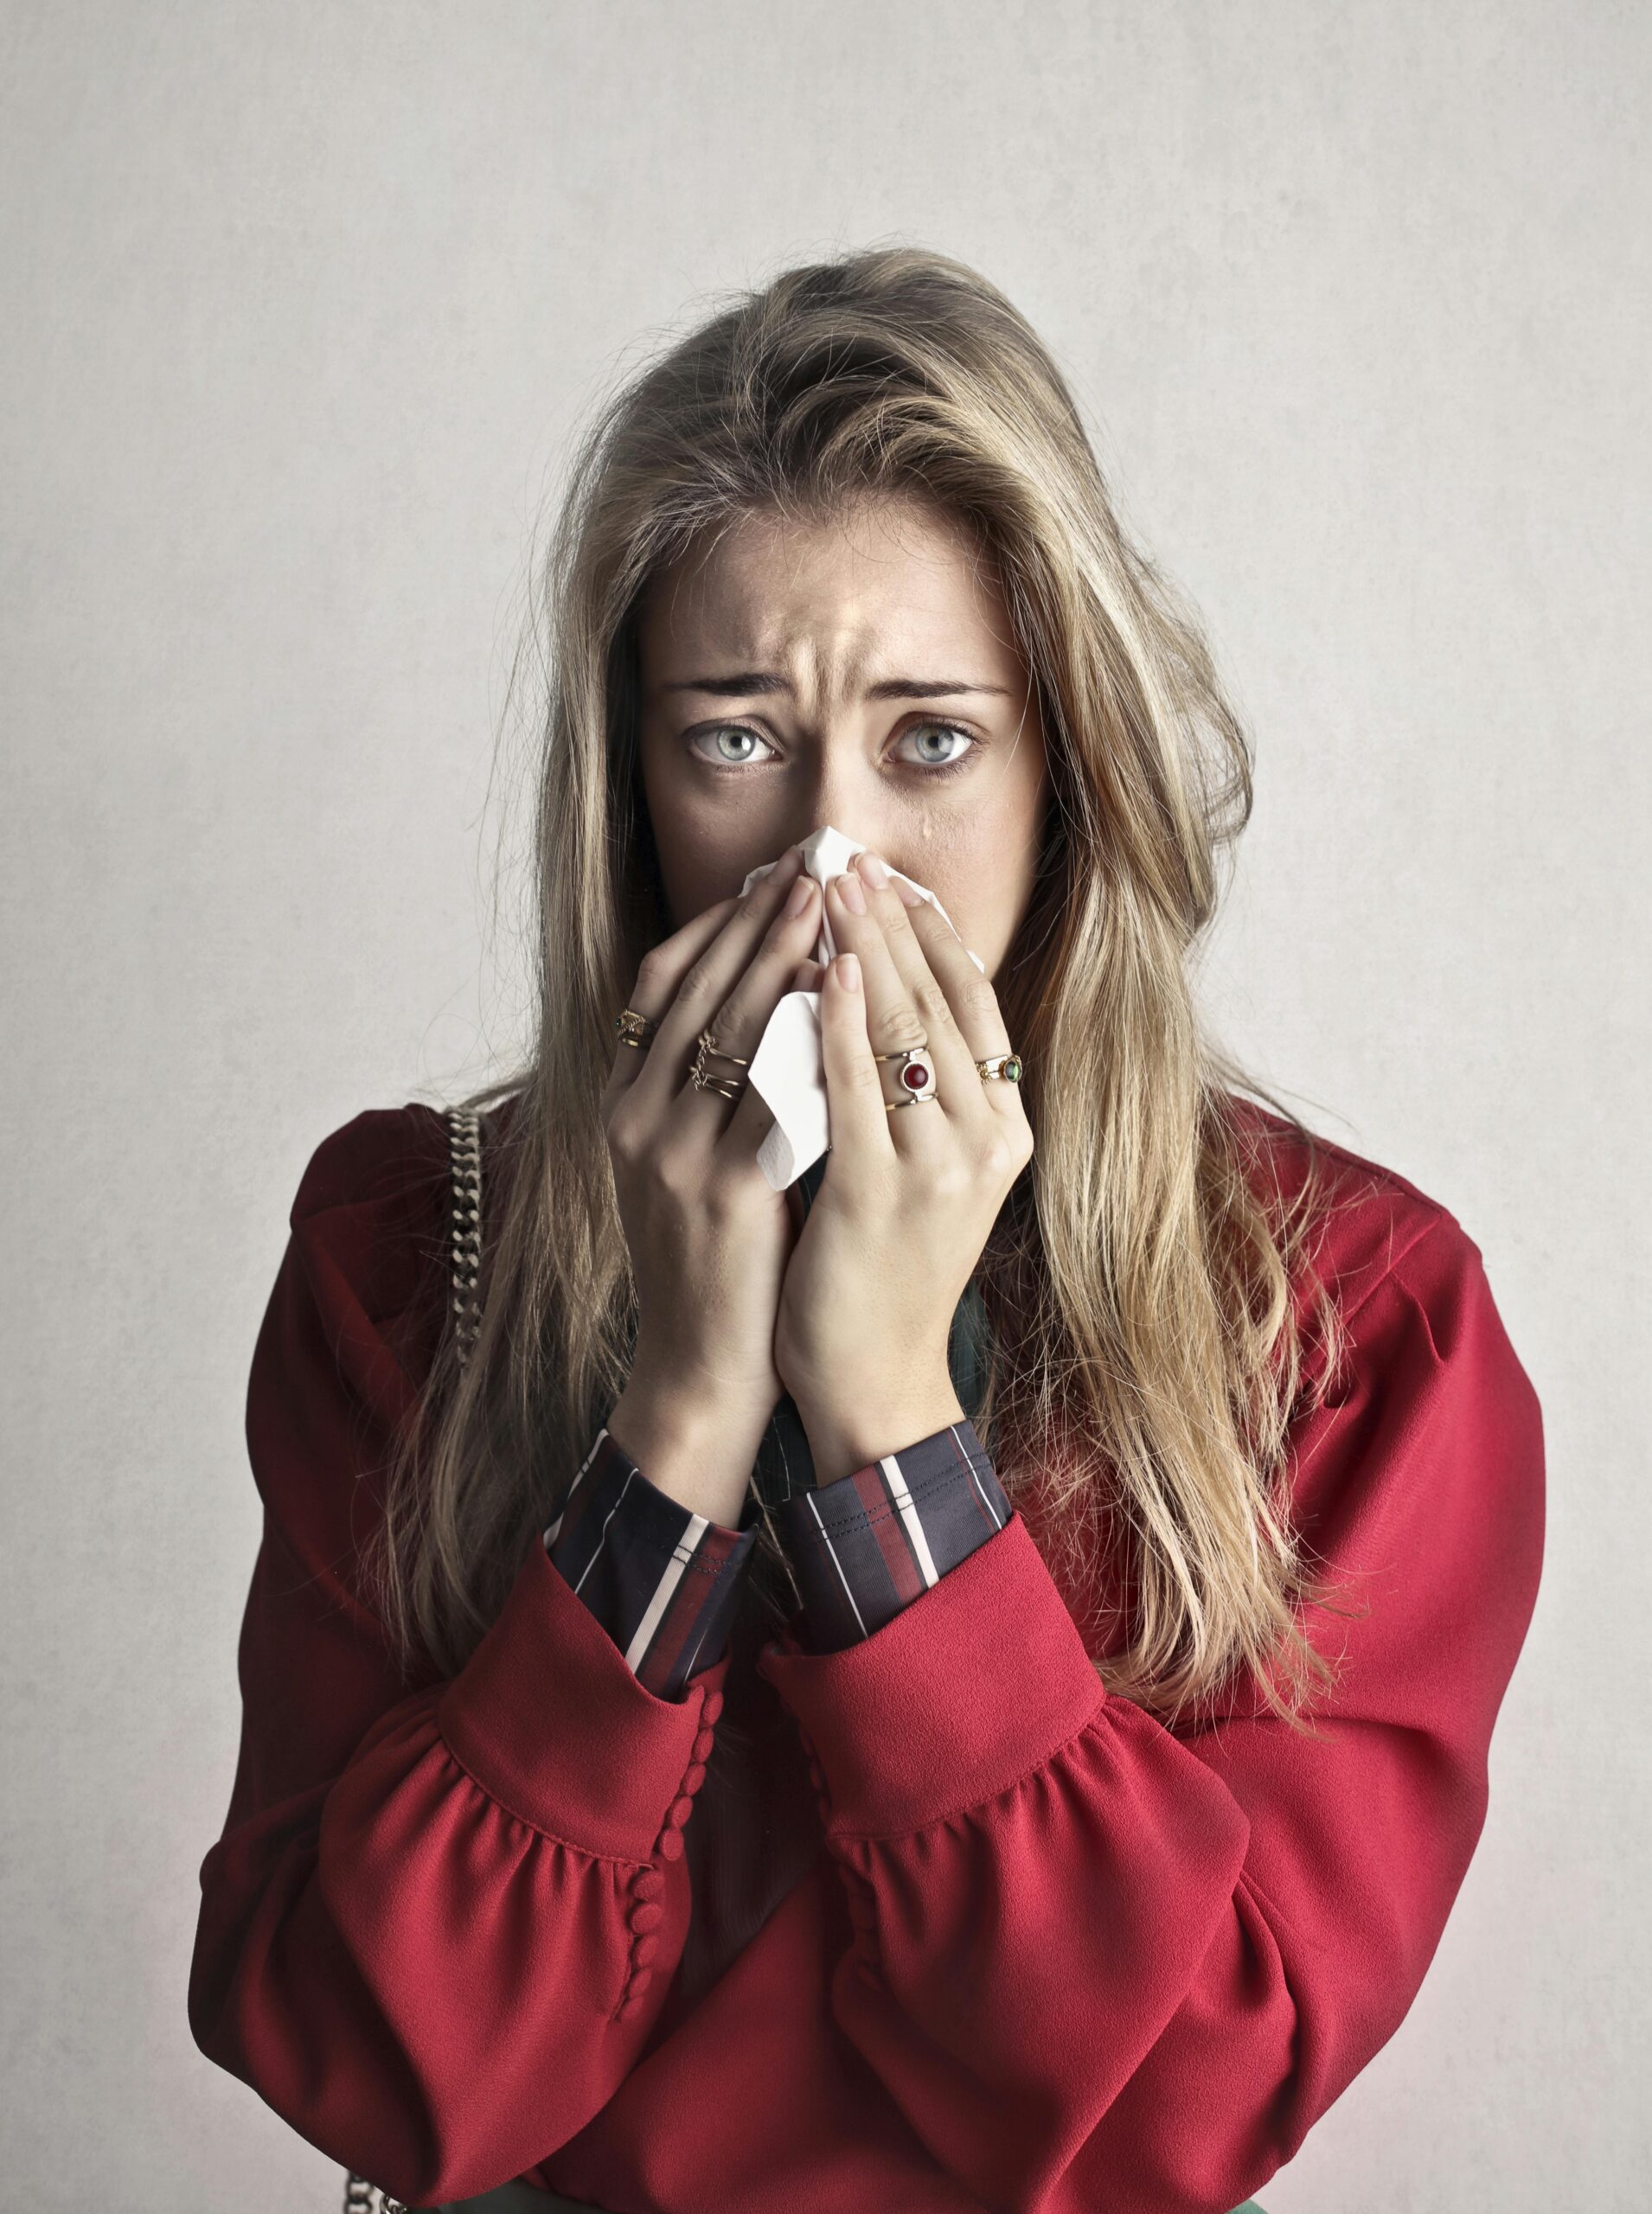 Spiritual Meanings of Sneezing Multiple Times